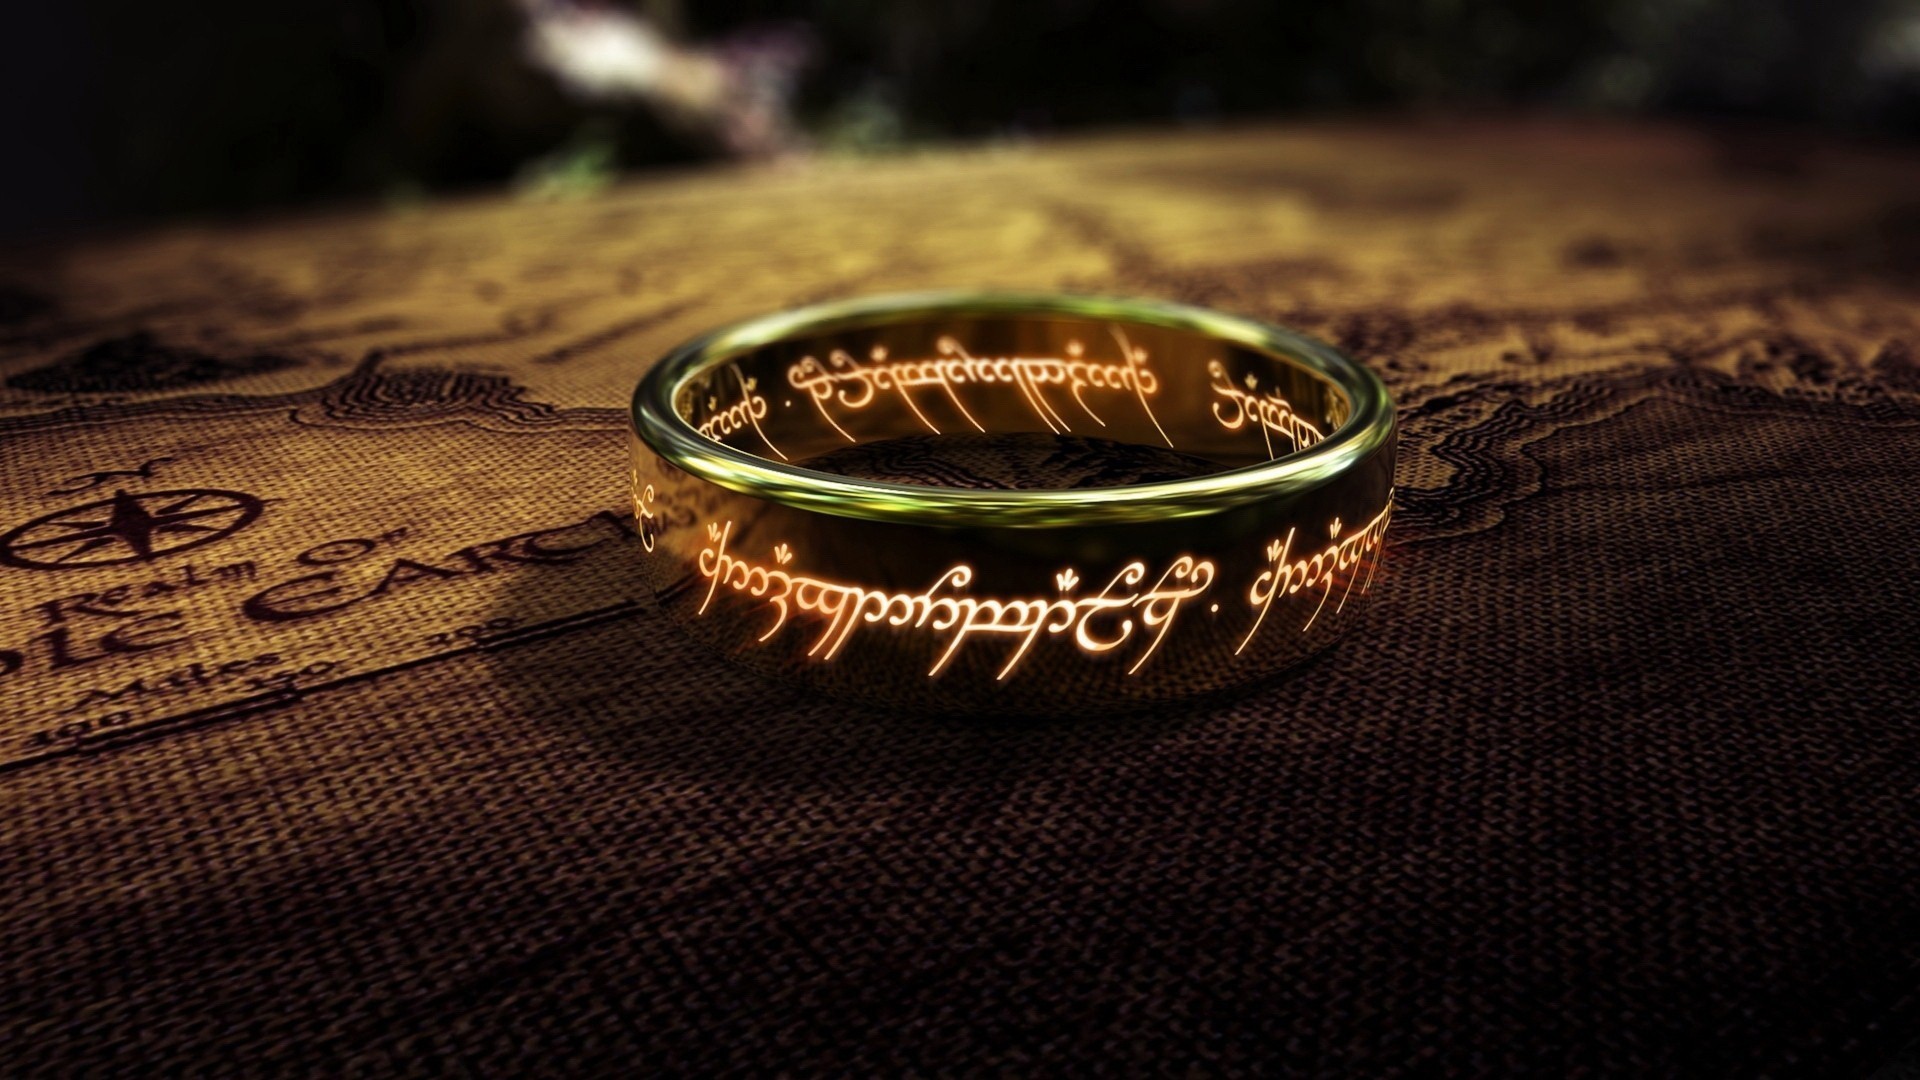 1920x1080 Lord of the Rings Wallpapers (26)